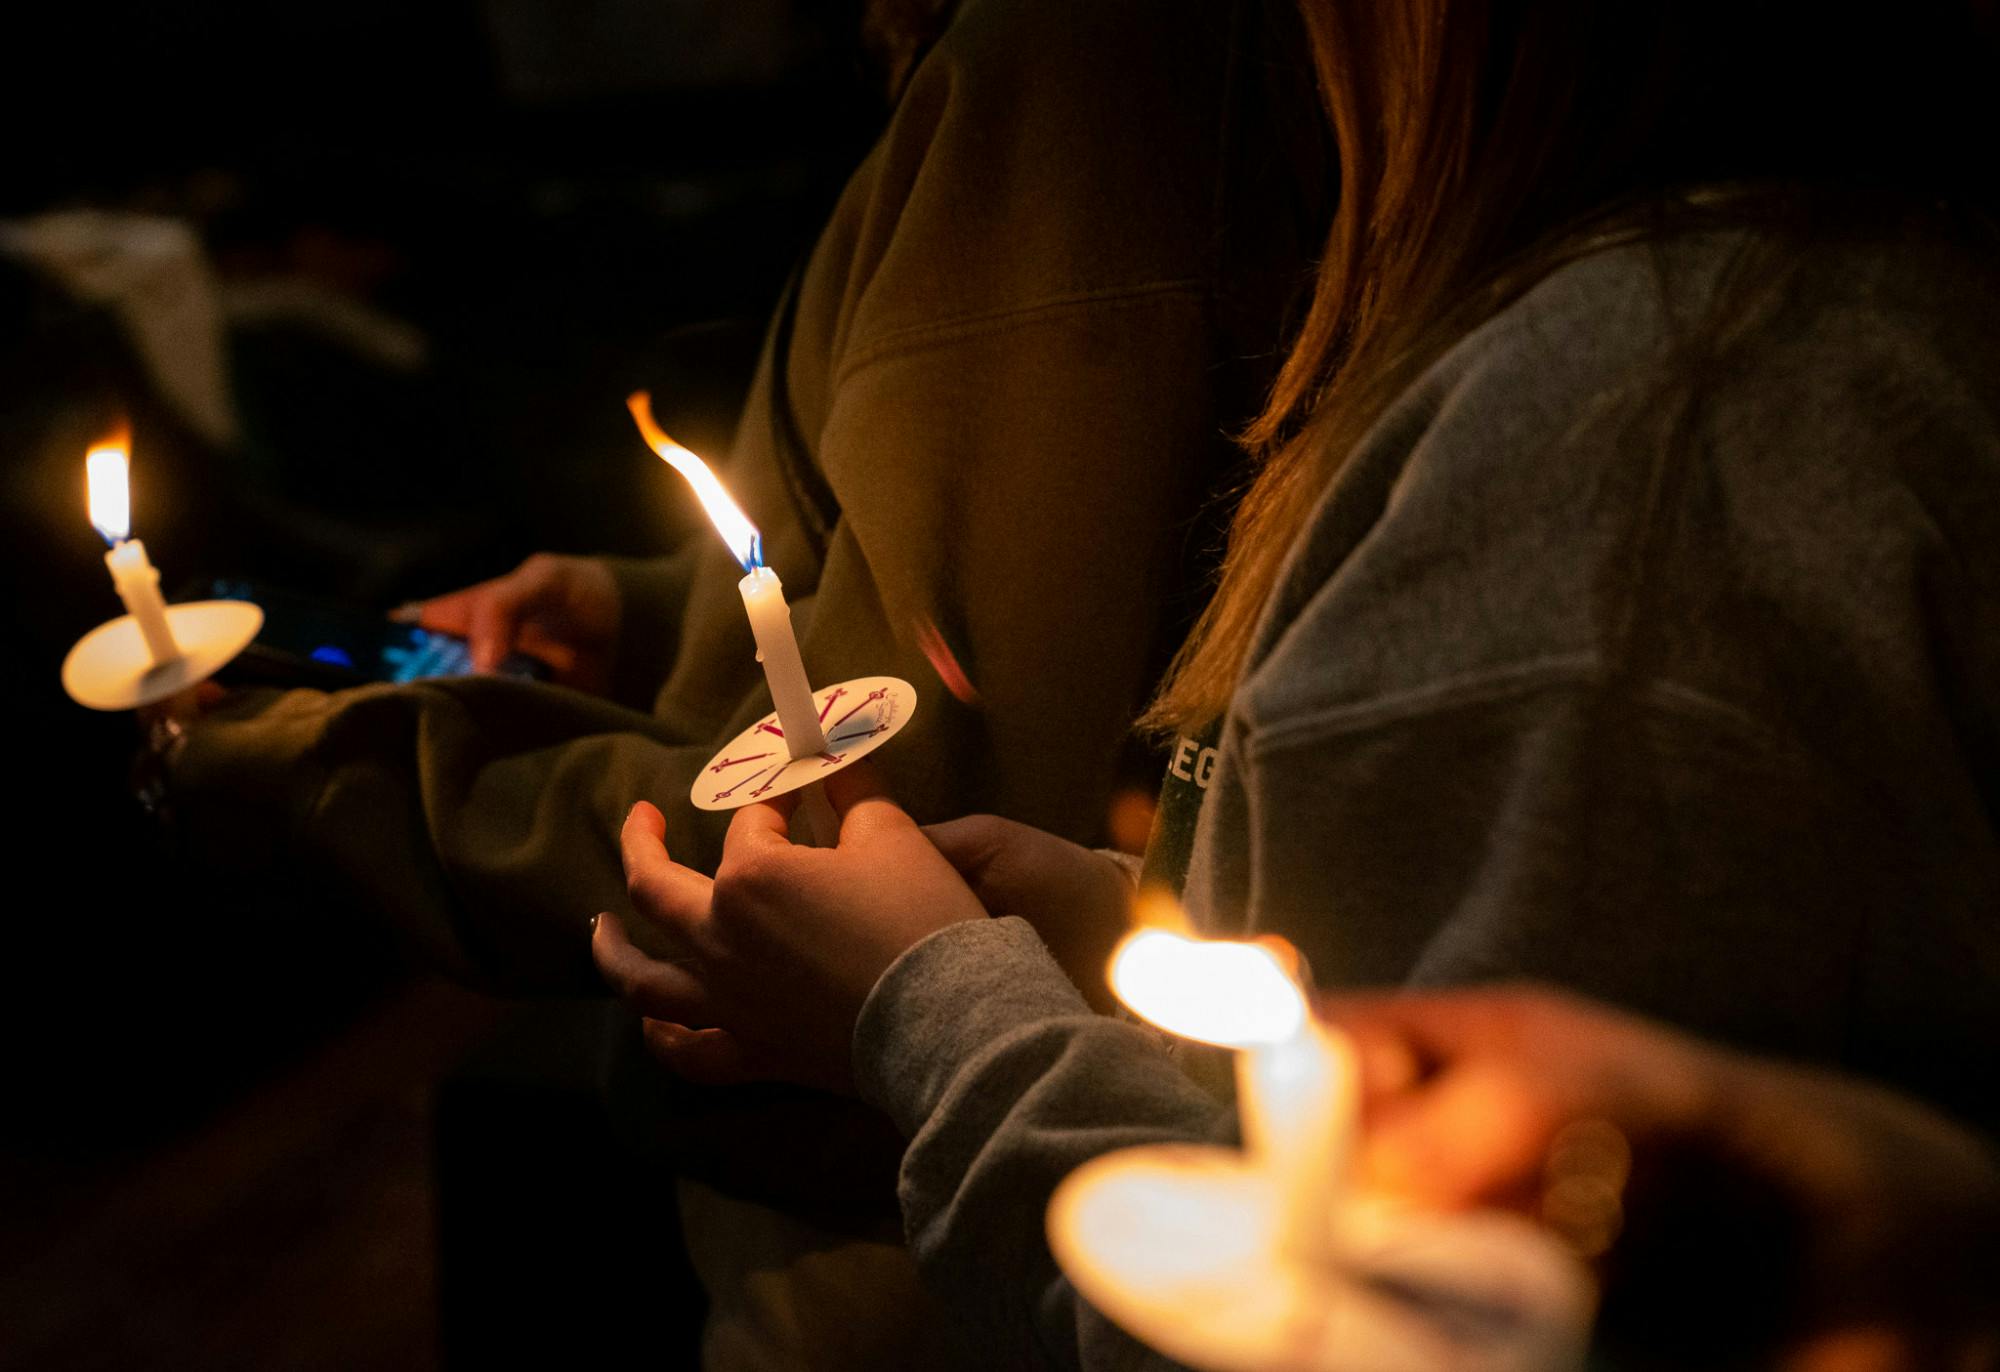 Chicago residents light candles during a vigil organized by Chicago Spartans to support the MSU Community on Feb. 18, 2023. Hundreds gathered at the Tree House in the city to mourn the loss of three fellow Spartans after a mass shooting took place on campus on Feb. 13, 2023. 